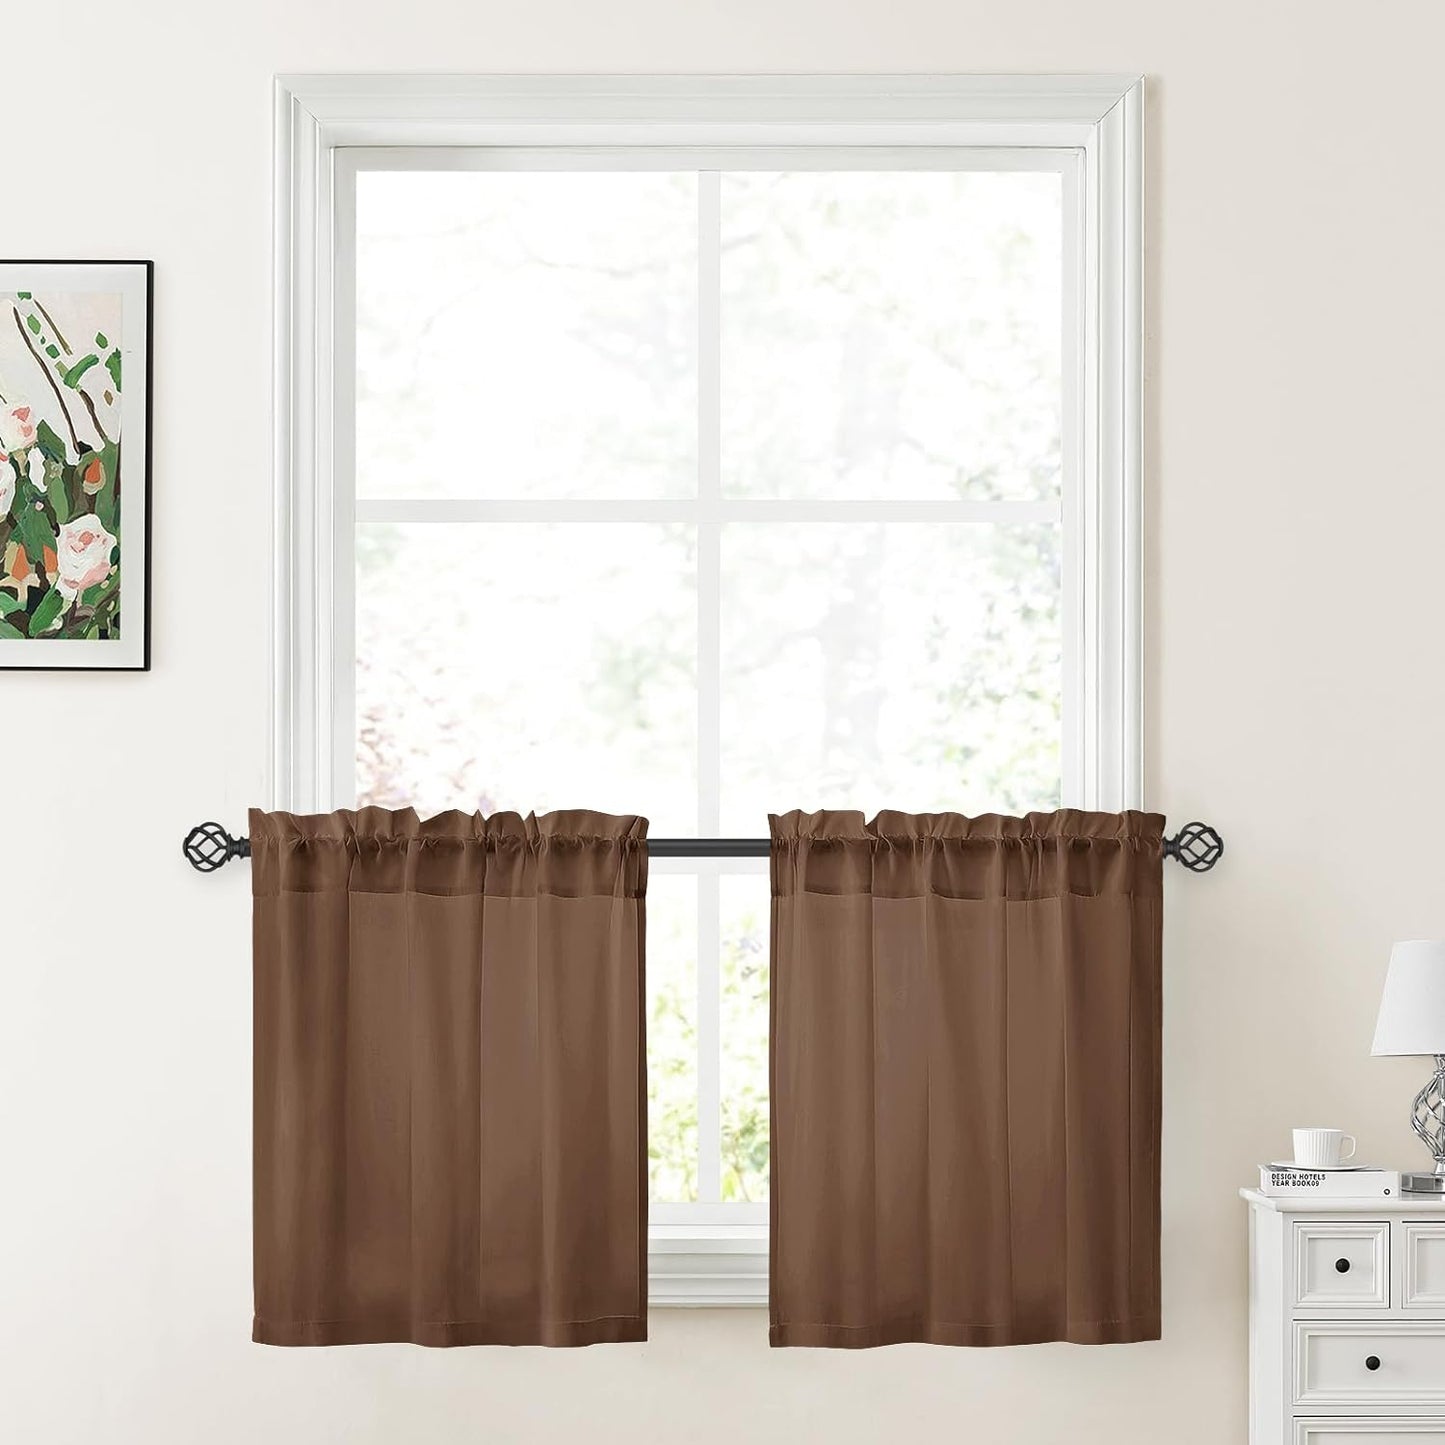 HOMEIDEAS Non-See-Through White Privacy Sheer Curtains 52 X 84 Inches Long 2 Panels Semi Sheer Curtains Light Filtering Window Curtains Drapes for Bedroom Living Room  HOMEIDEAS Brown W30" X L24" 